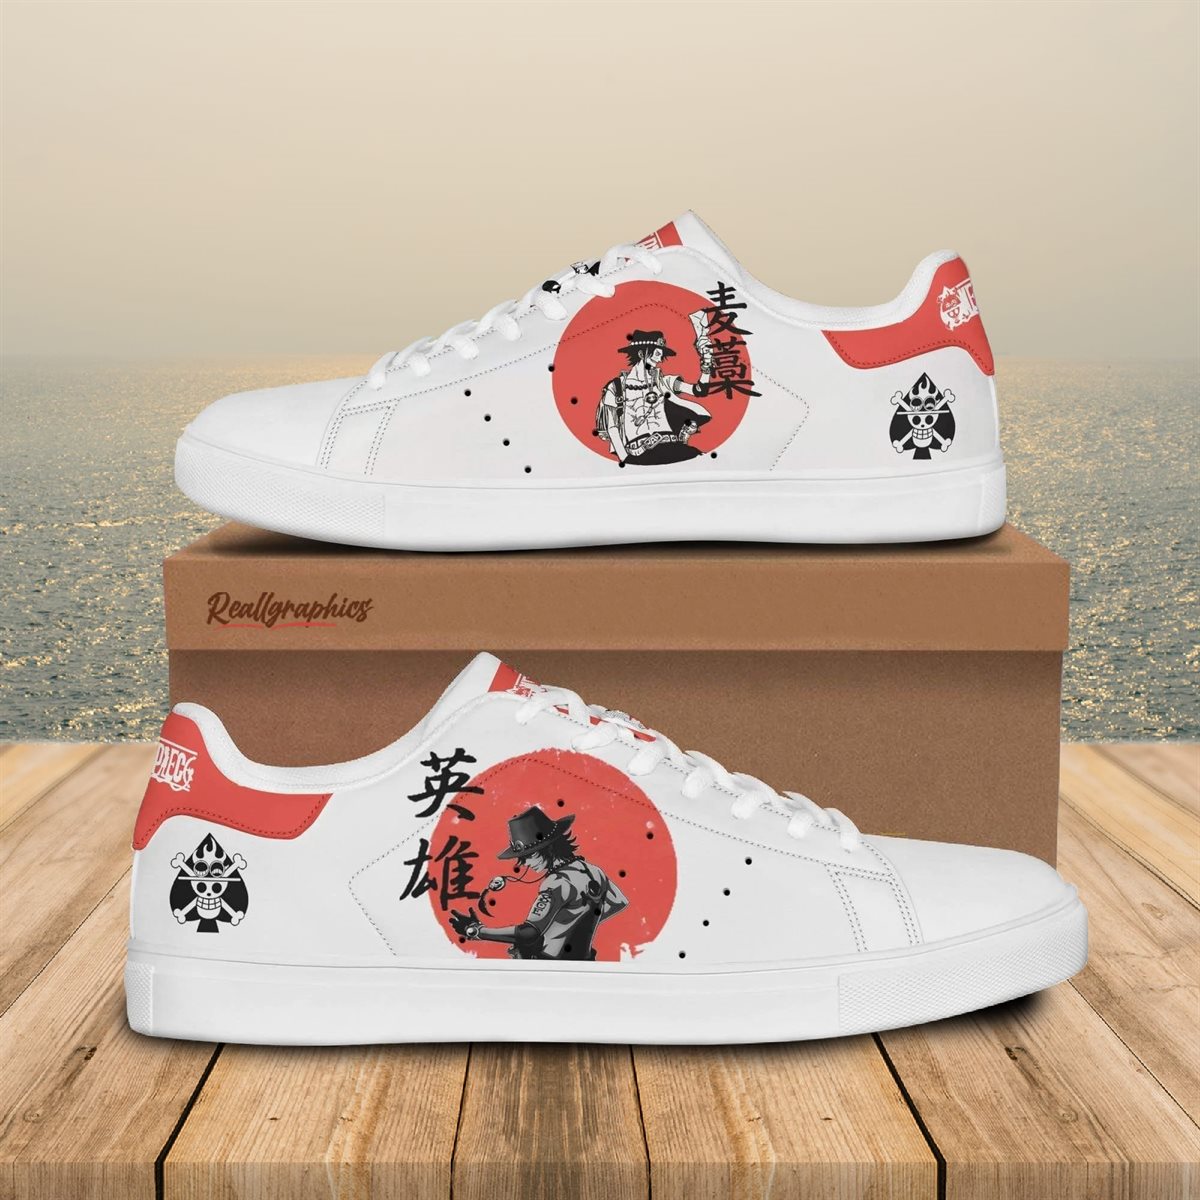 Details 83+ one piece anime shoes best - in.coedo.com.vn